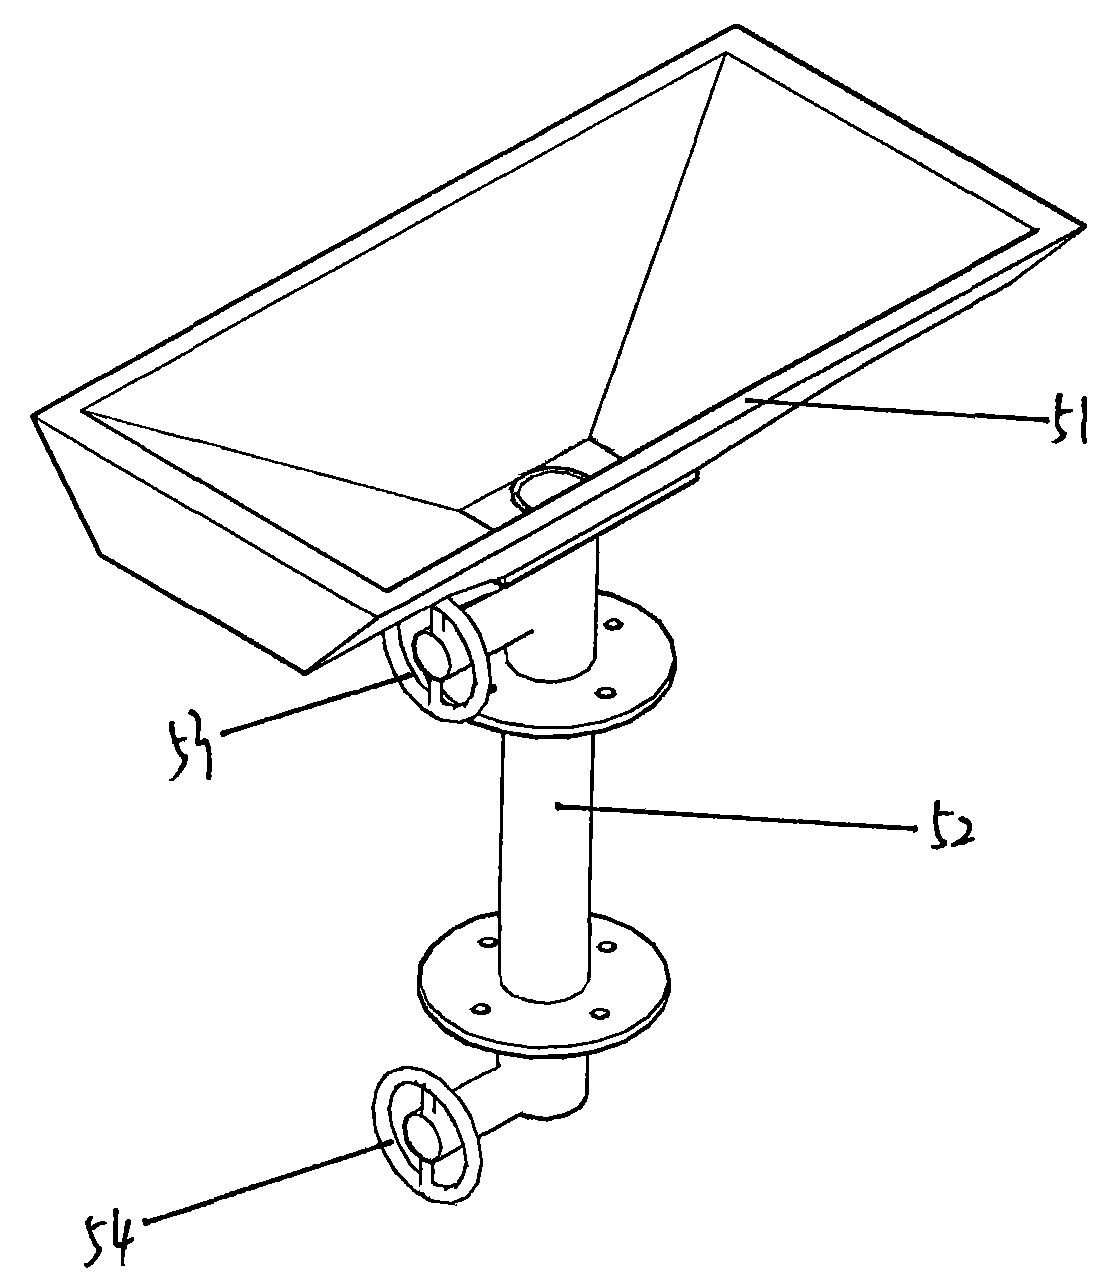 Electrobath capable of being used for continuous electrolysis to synthesize butanedioic acid